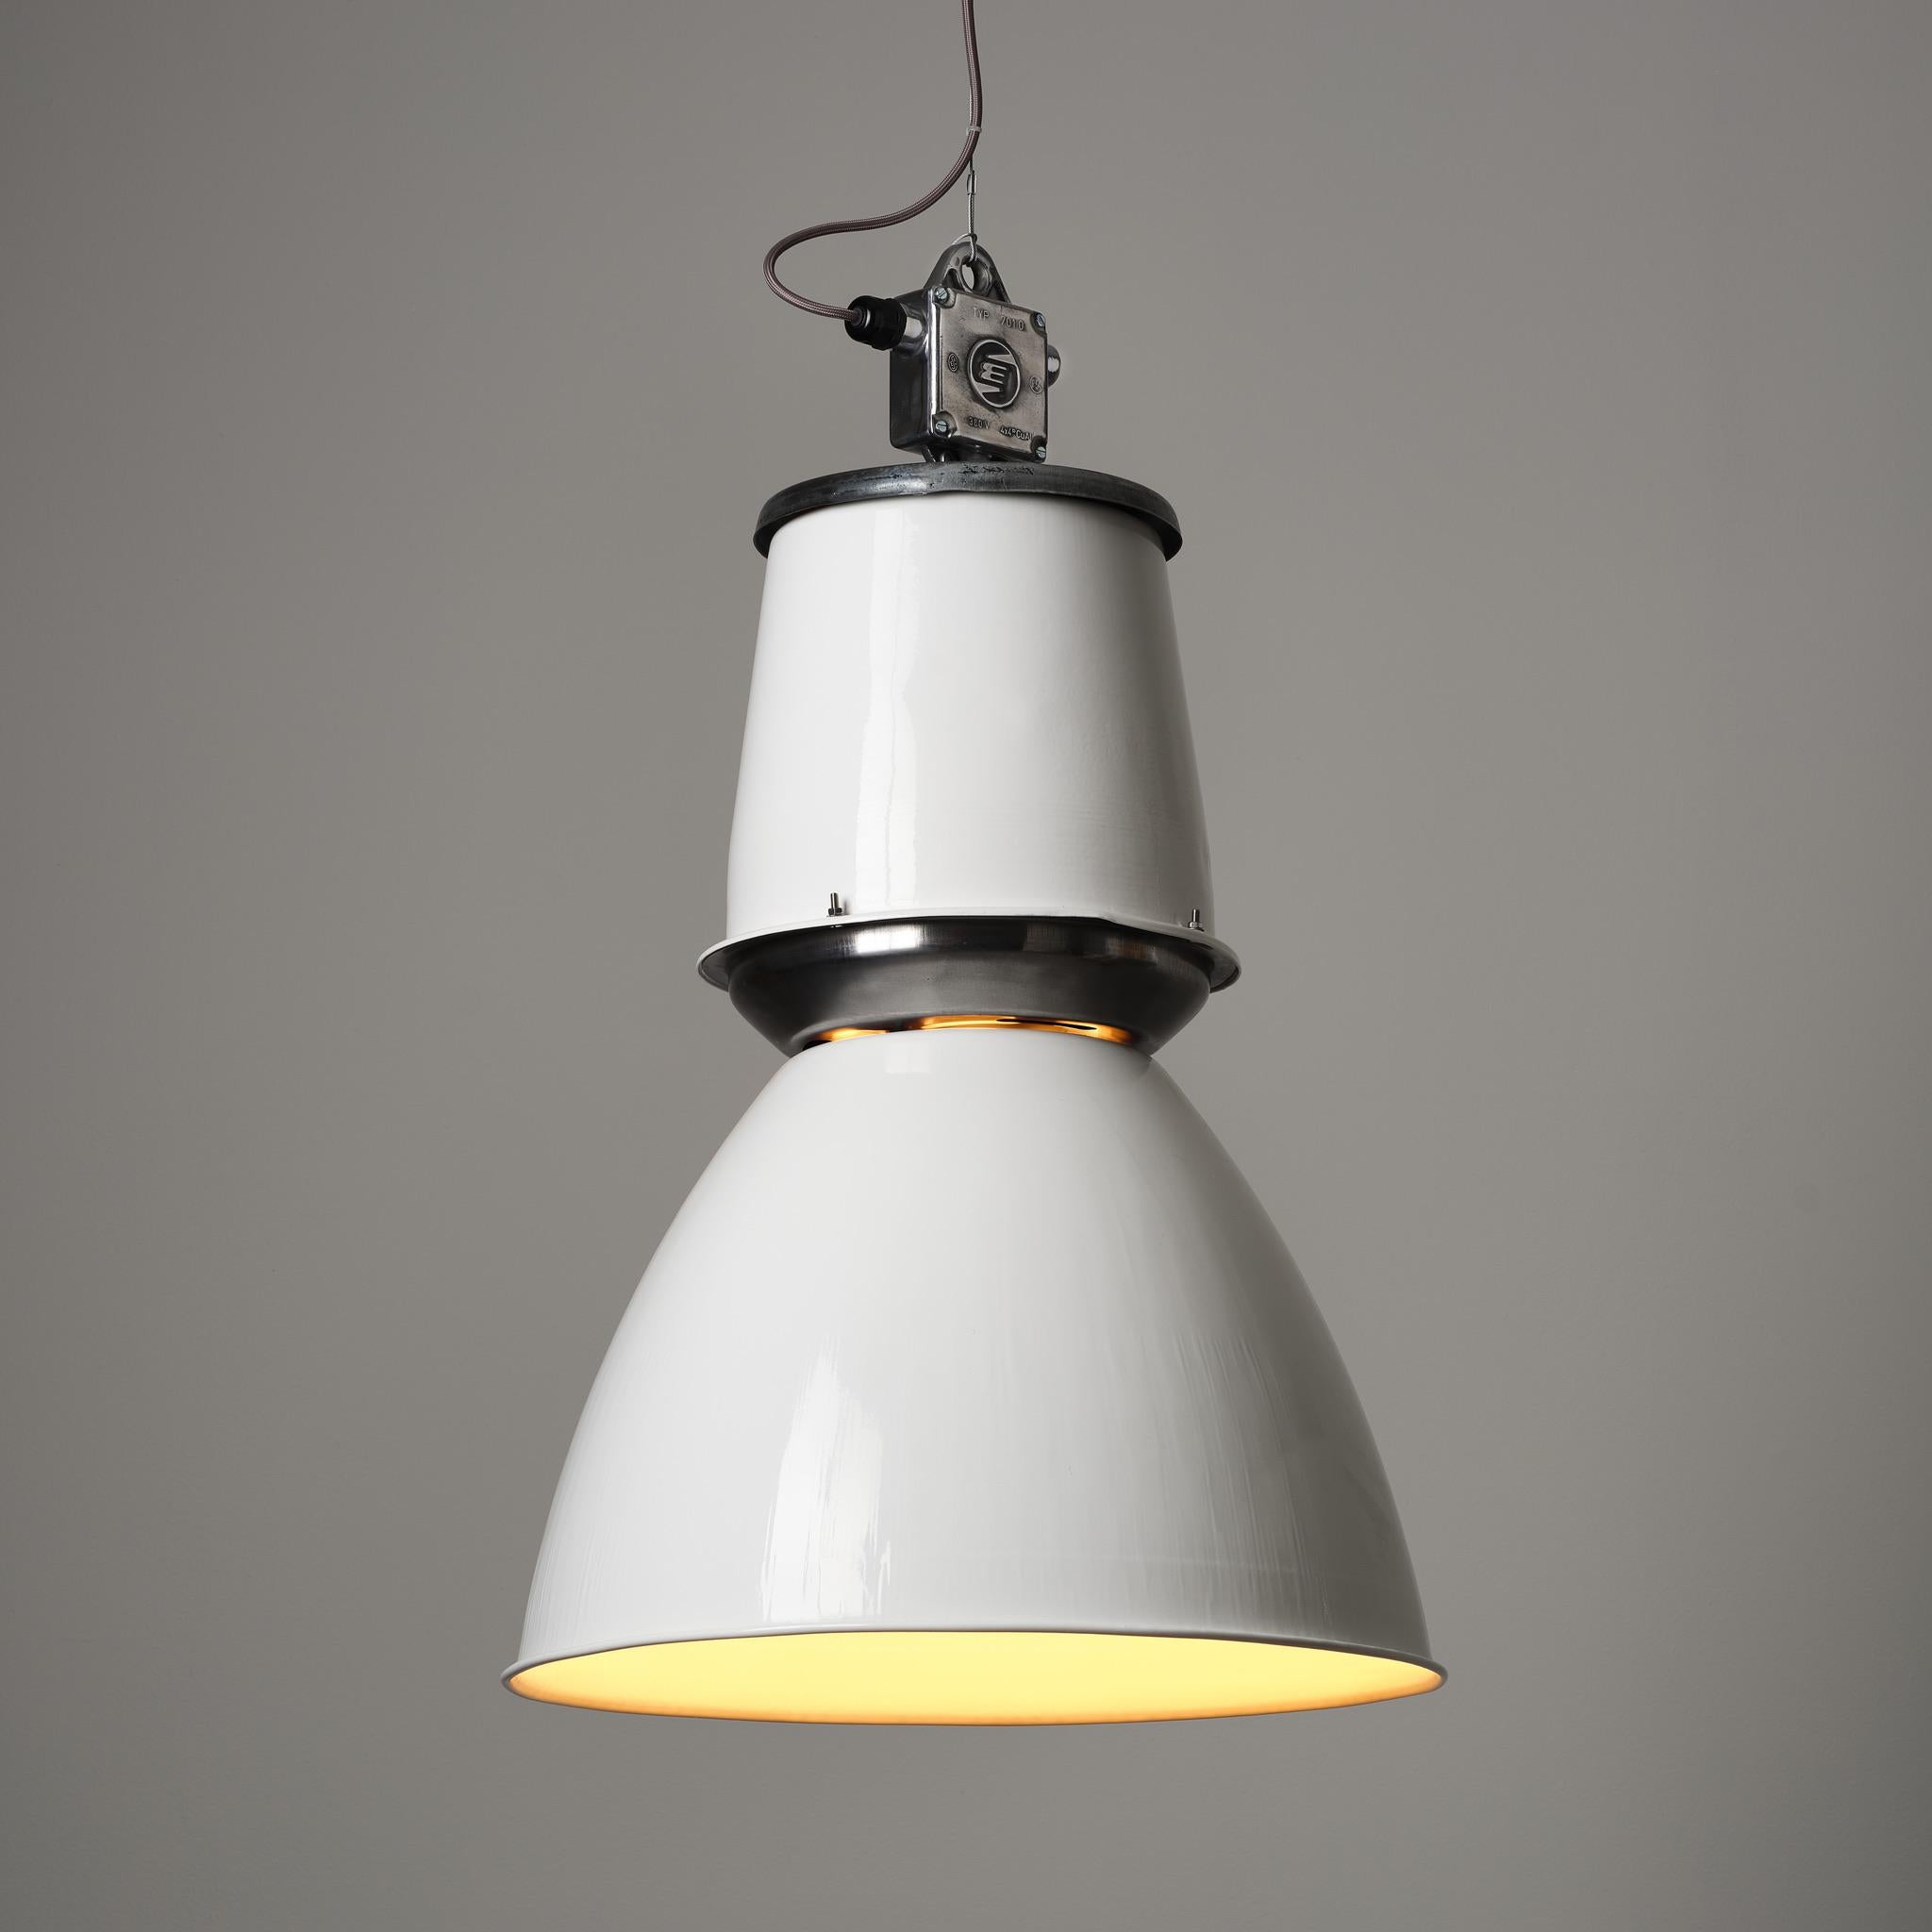 Vintage Giant Czech Pendant Light - Reconditioned Black/ Grey/ White In Good Condition For Sale In Str‌oud, GB